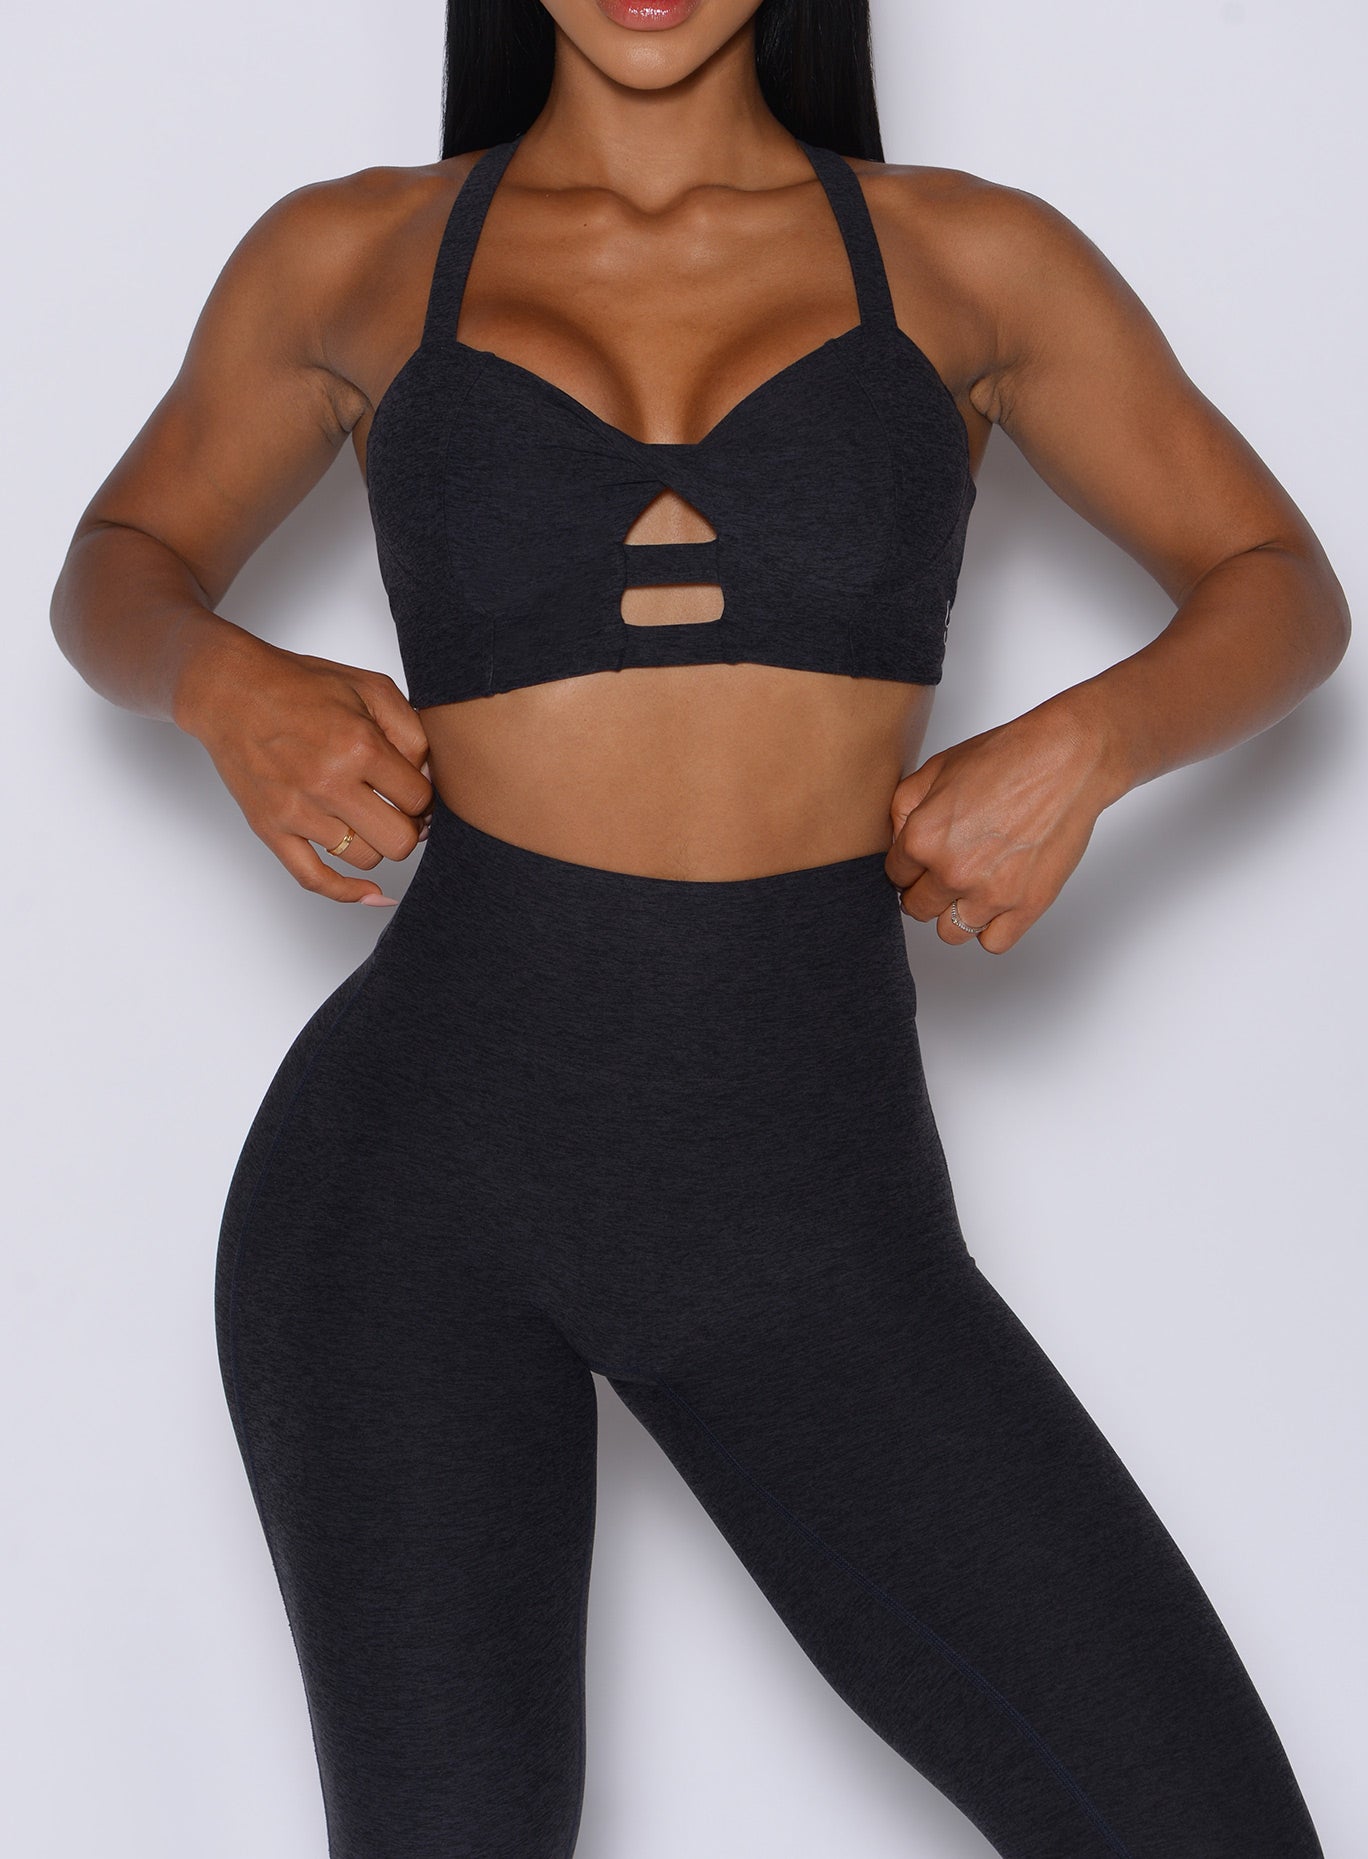 front profile view of a model wearing our black core set bra along with the matching leggings